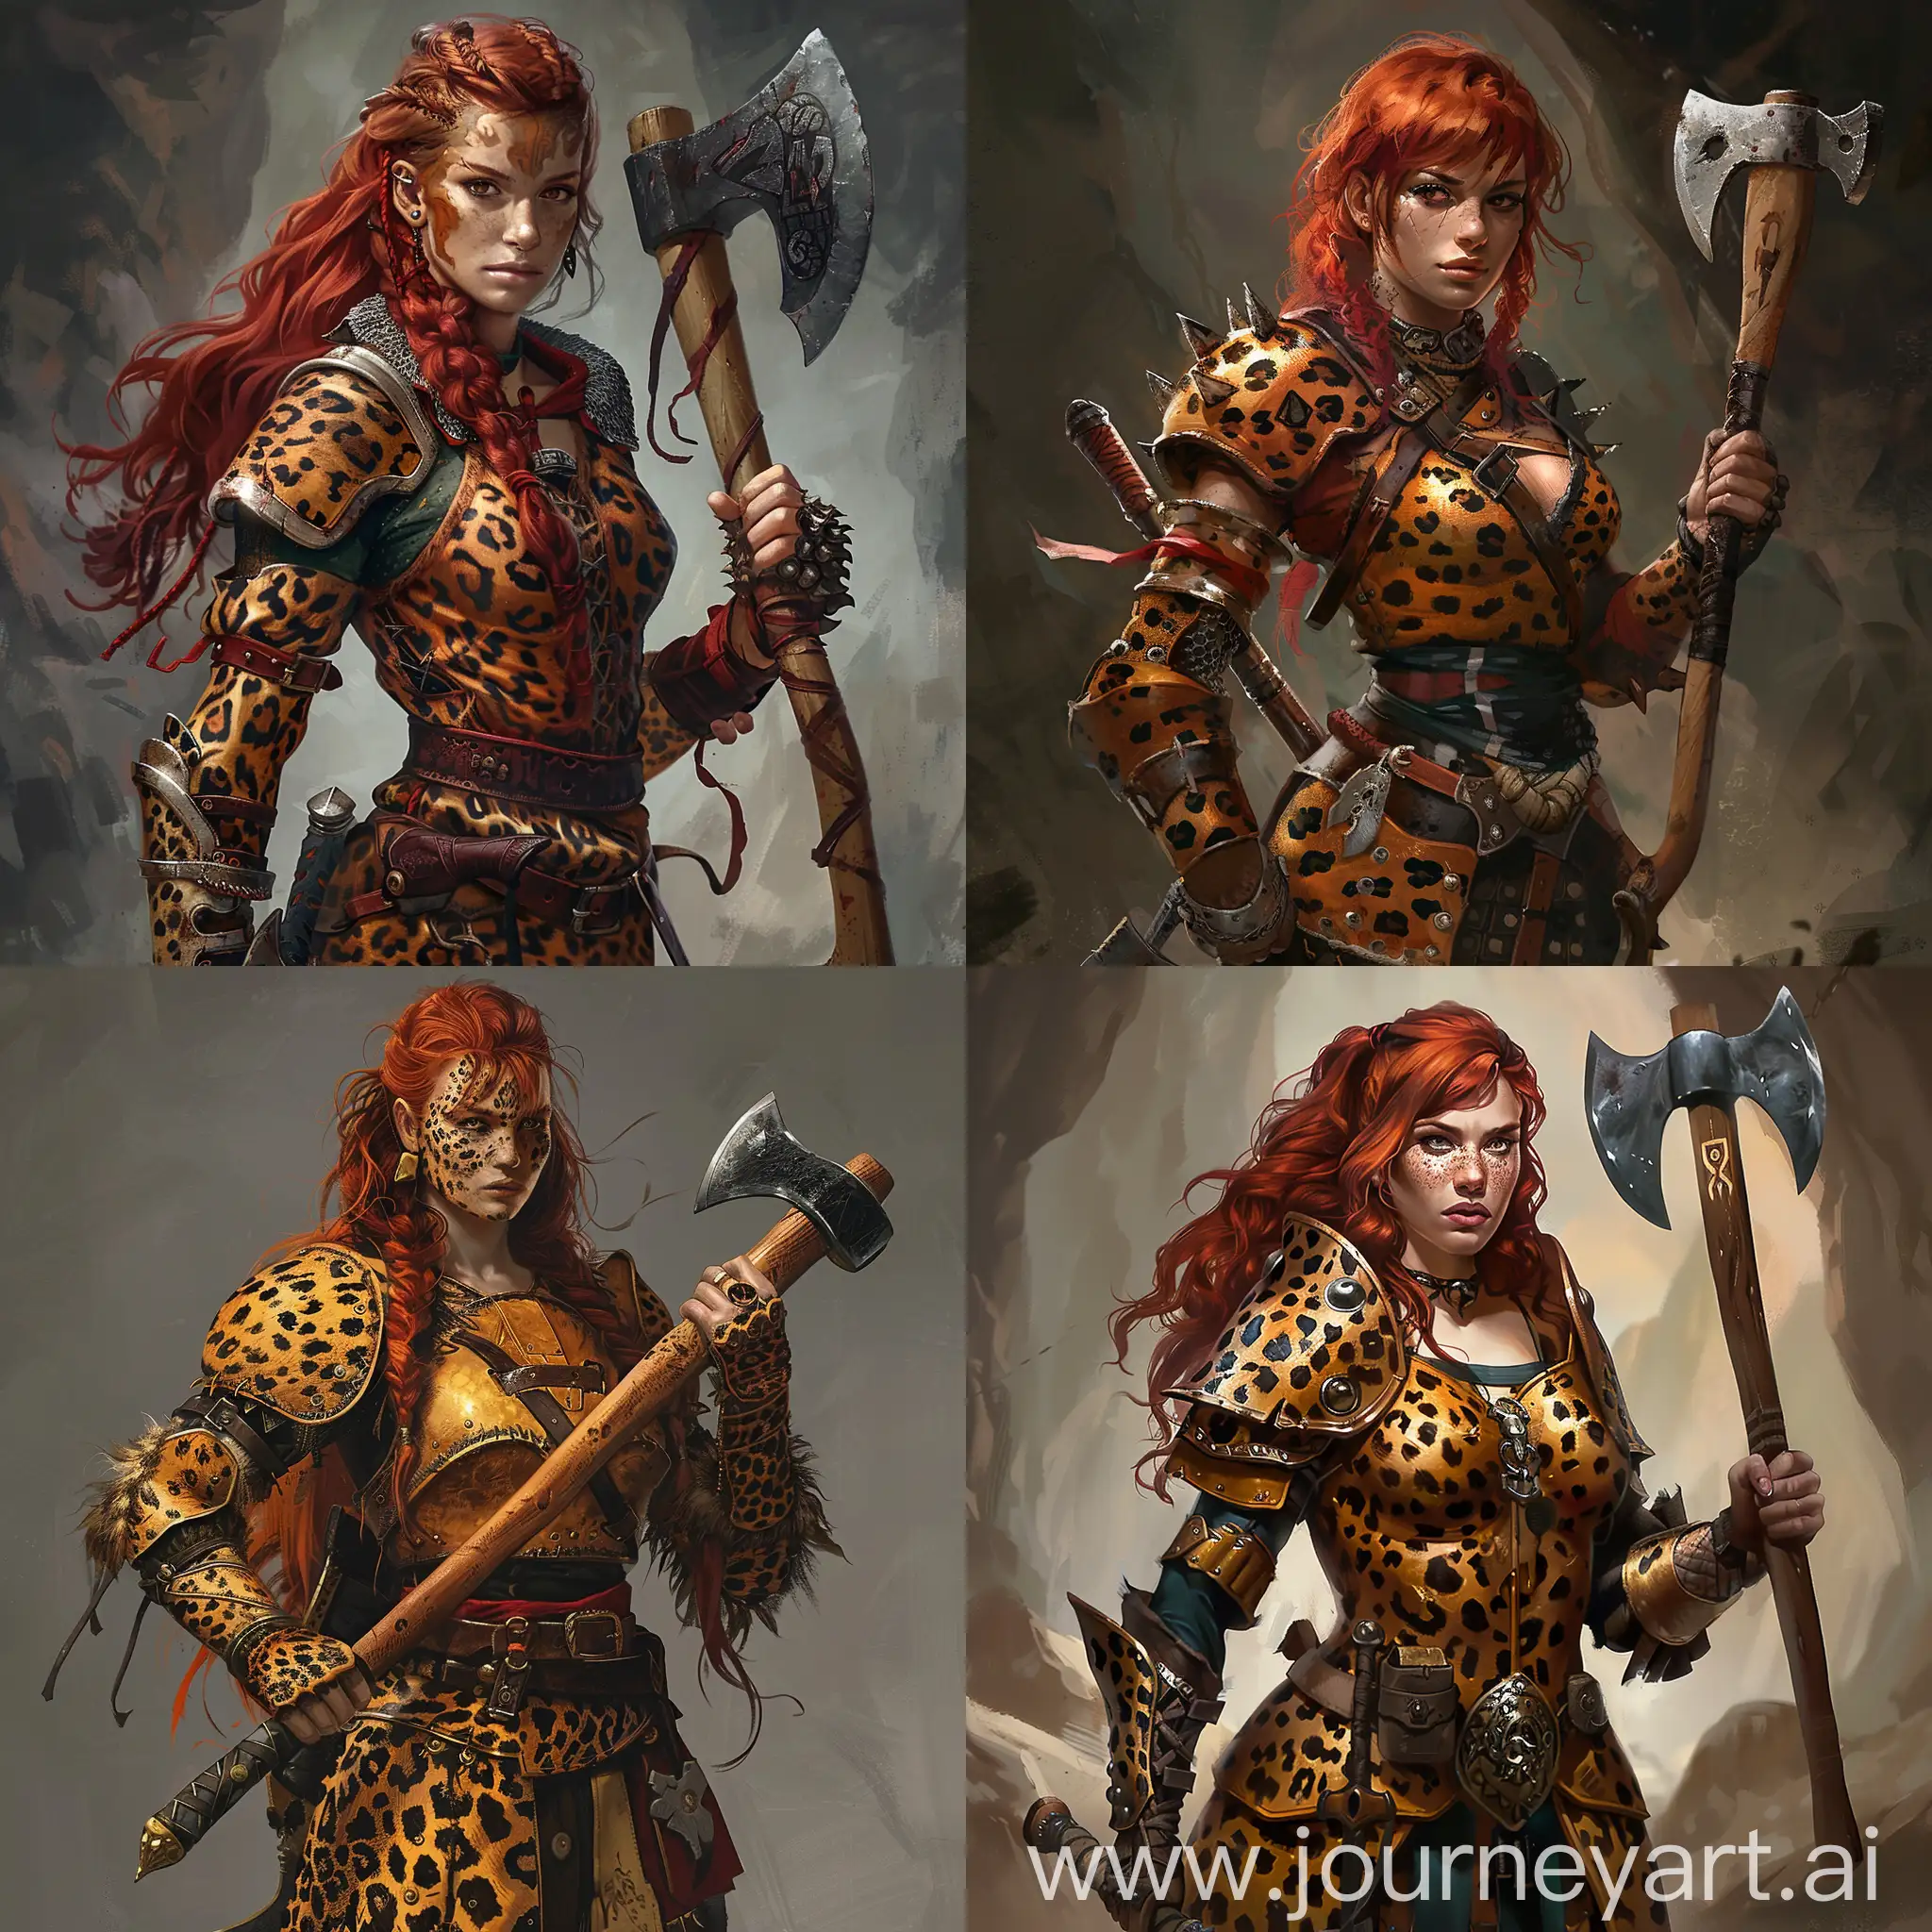 Fierce-RedHaired-Warrior-in-Leopard-Armor-with-Axe